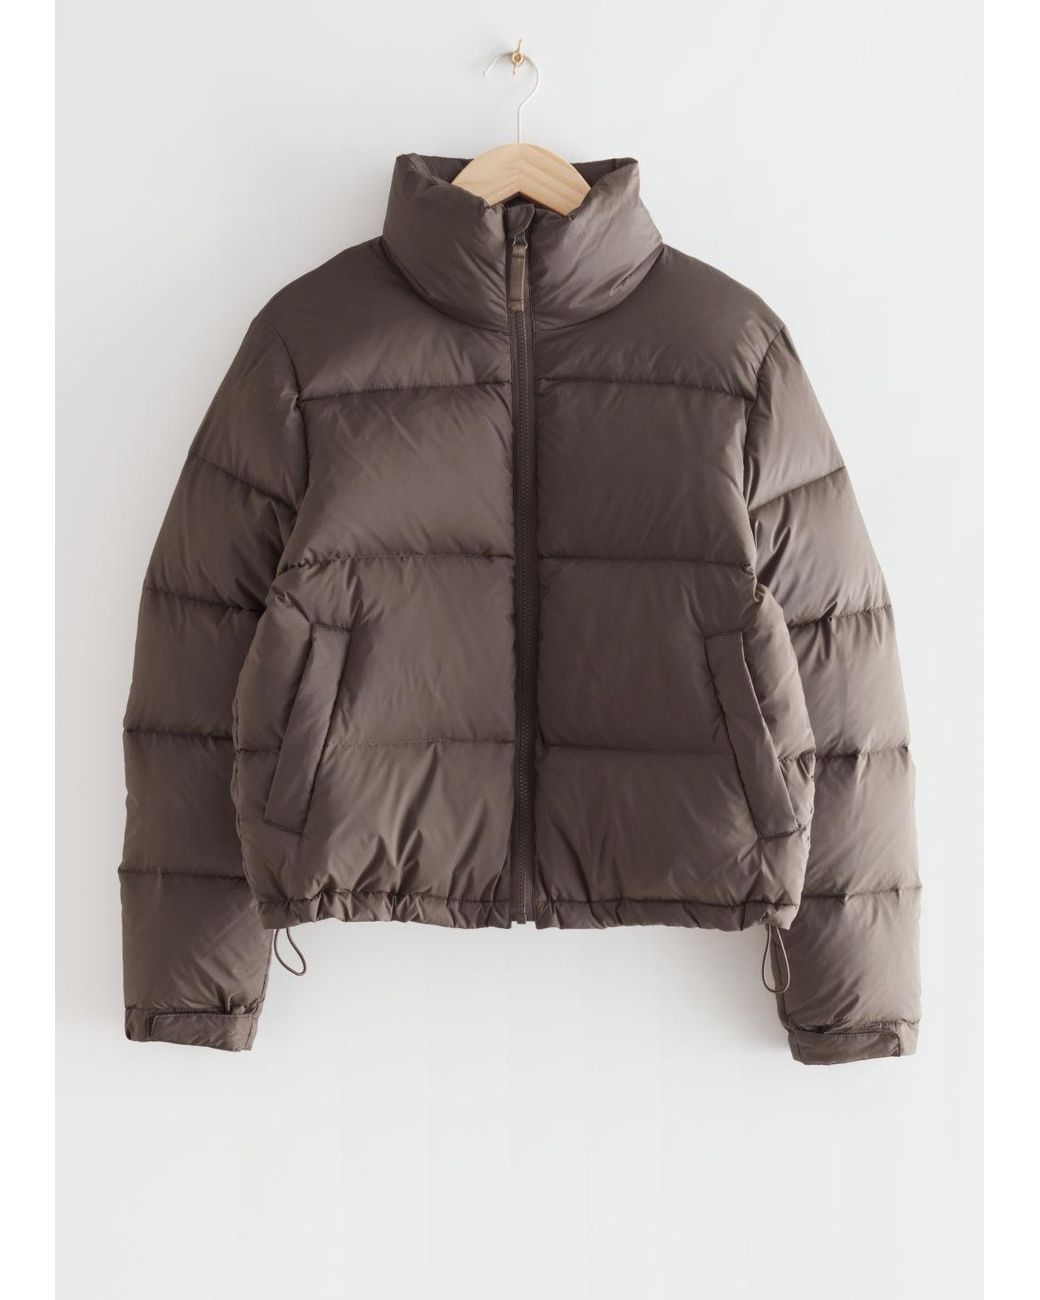 & Other Stories Boxy Puffer Jacket in Brown | Lyst